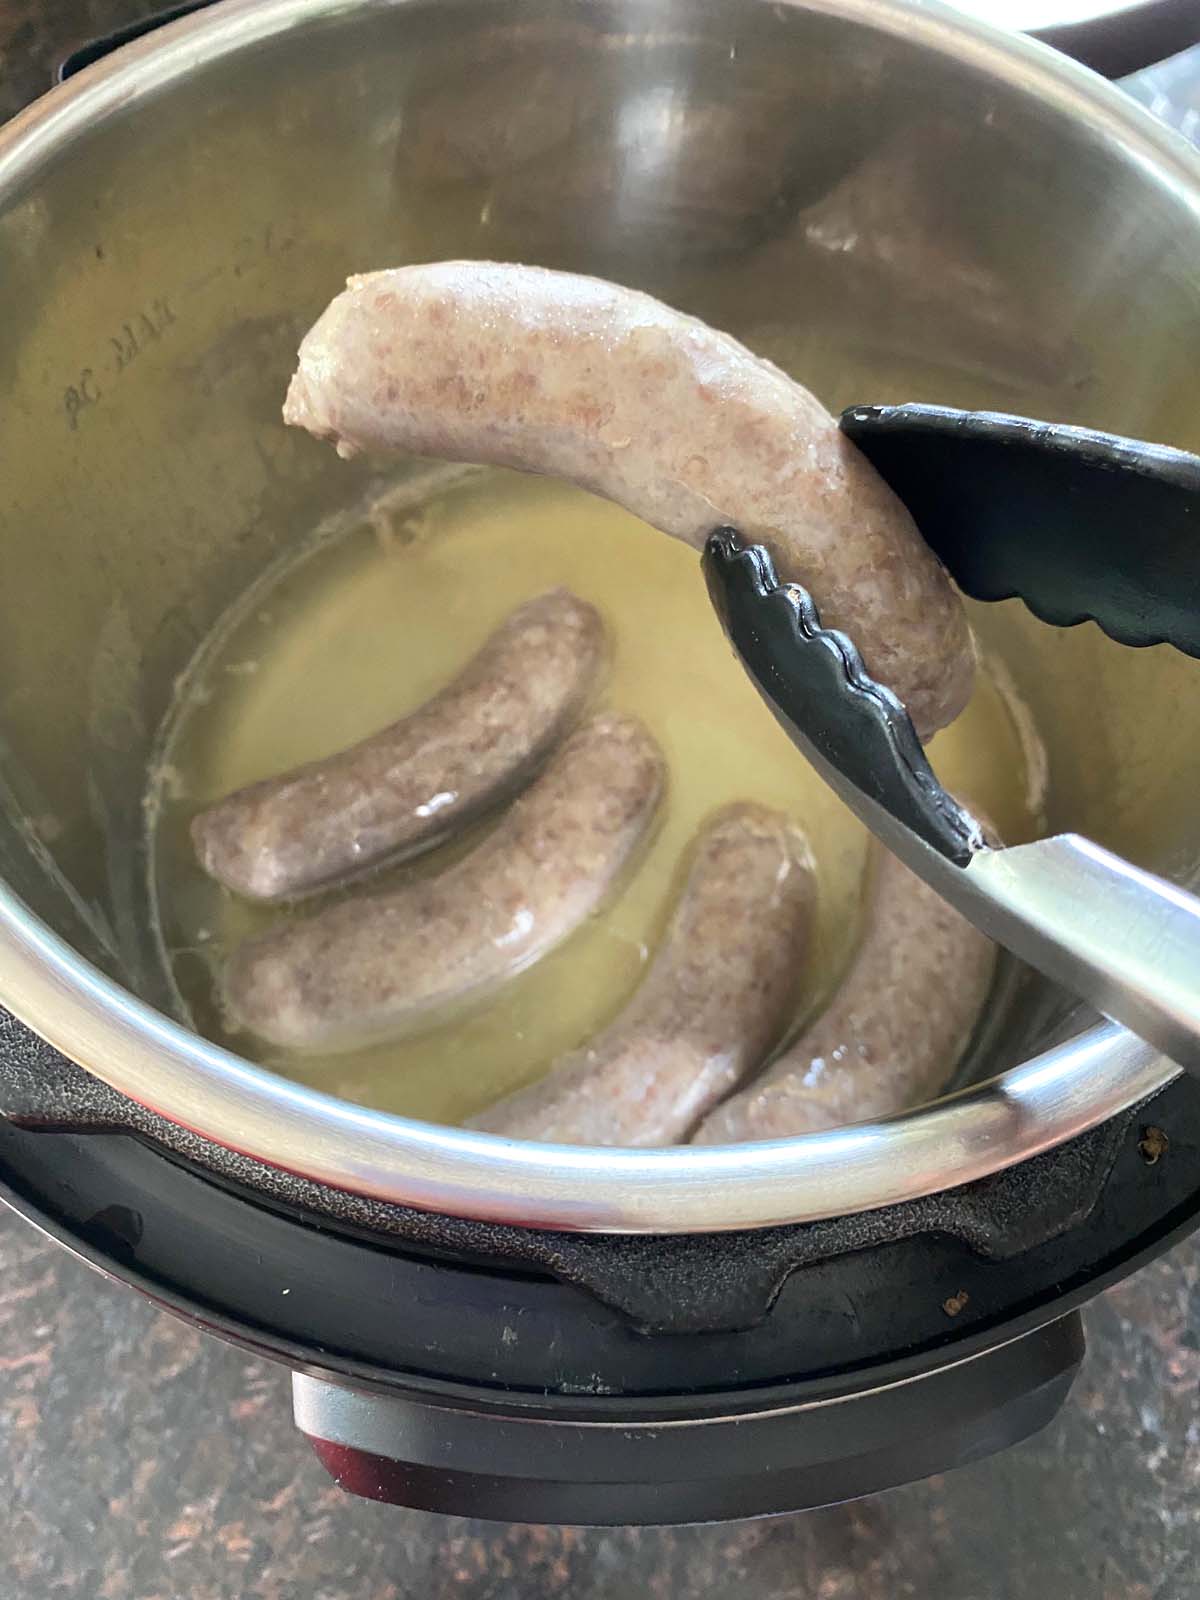 Tongs holding a cooked sausage over pot.